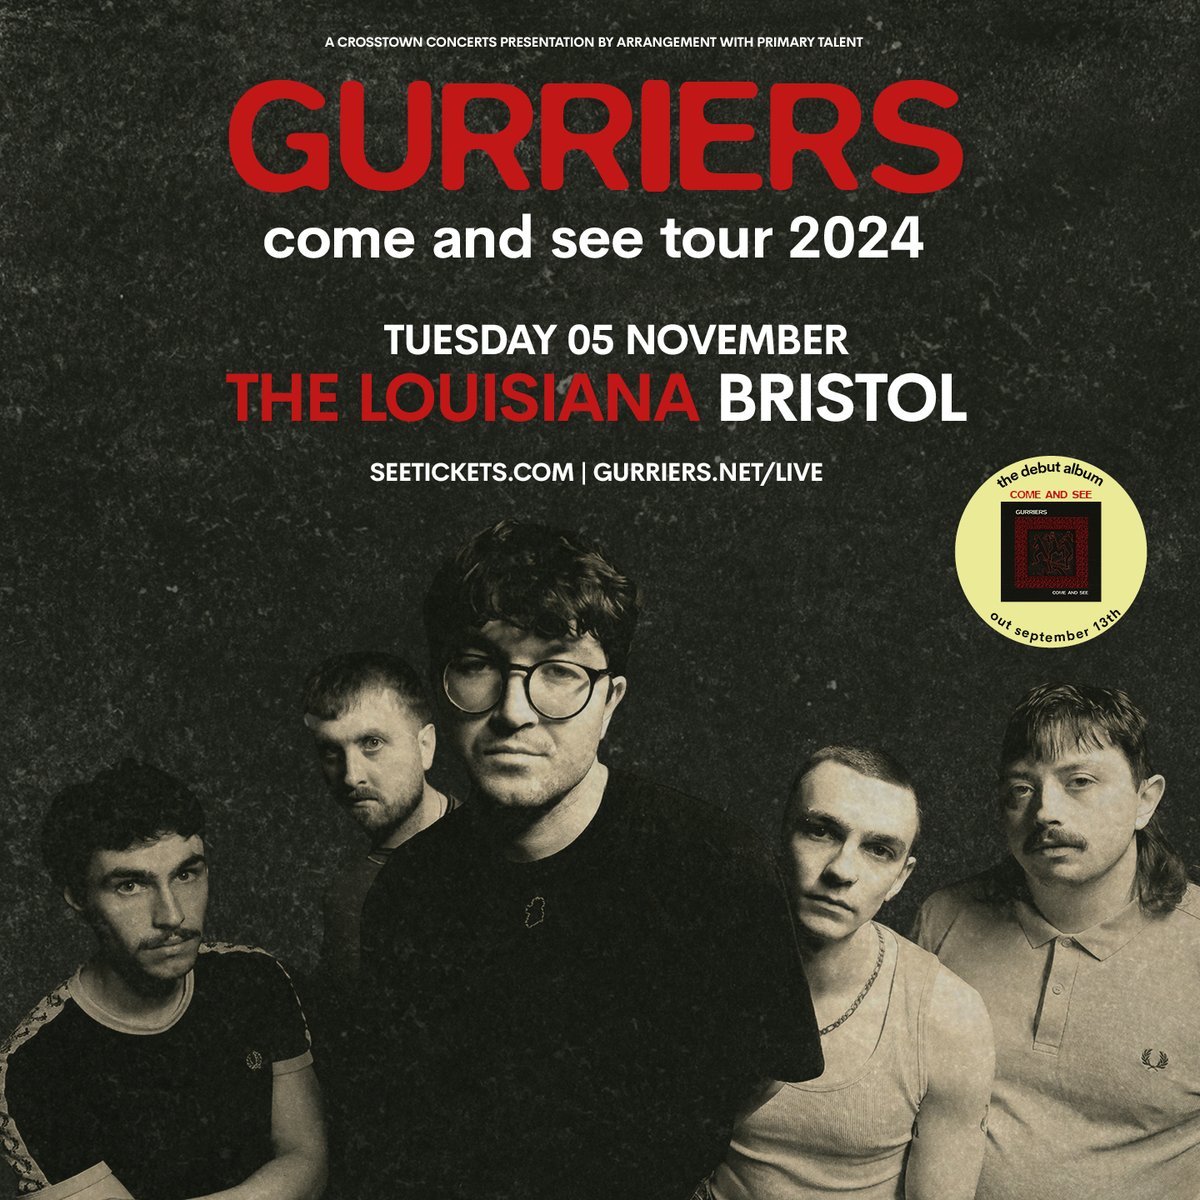 Tickets are on sale now for @gurriersband at @LouisianaBris on Tuesday 5th November. crosstownconcerts.seetickets.com/event/gurriers…